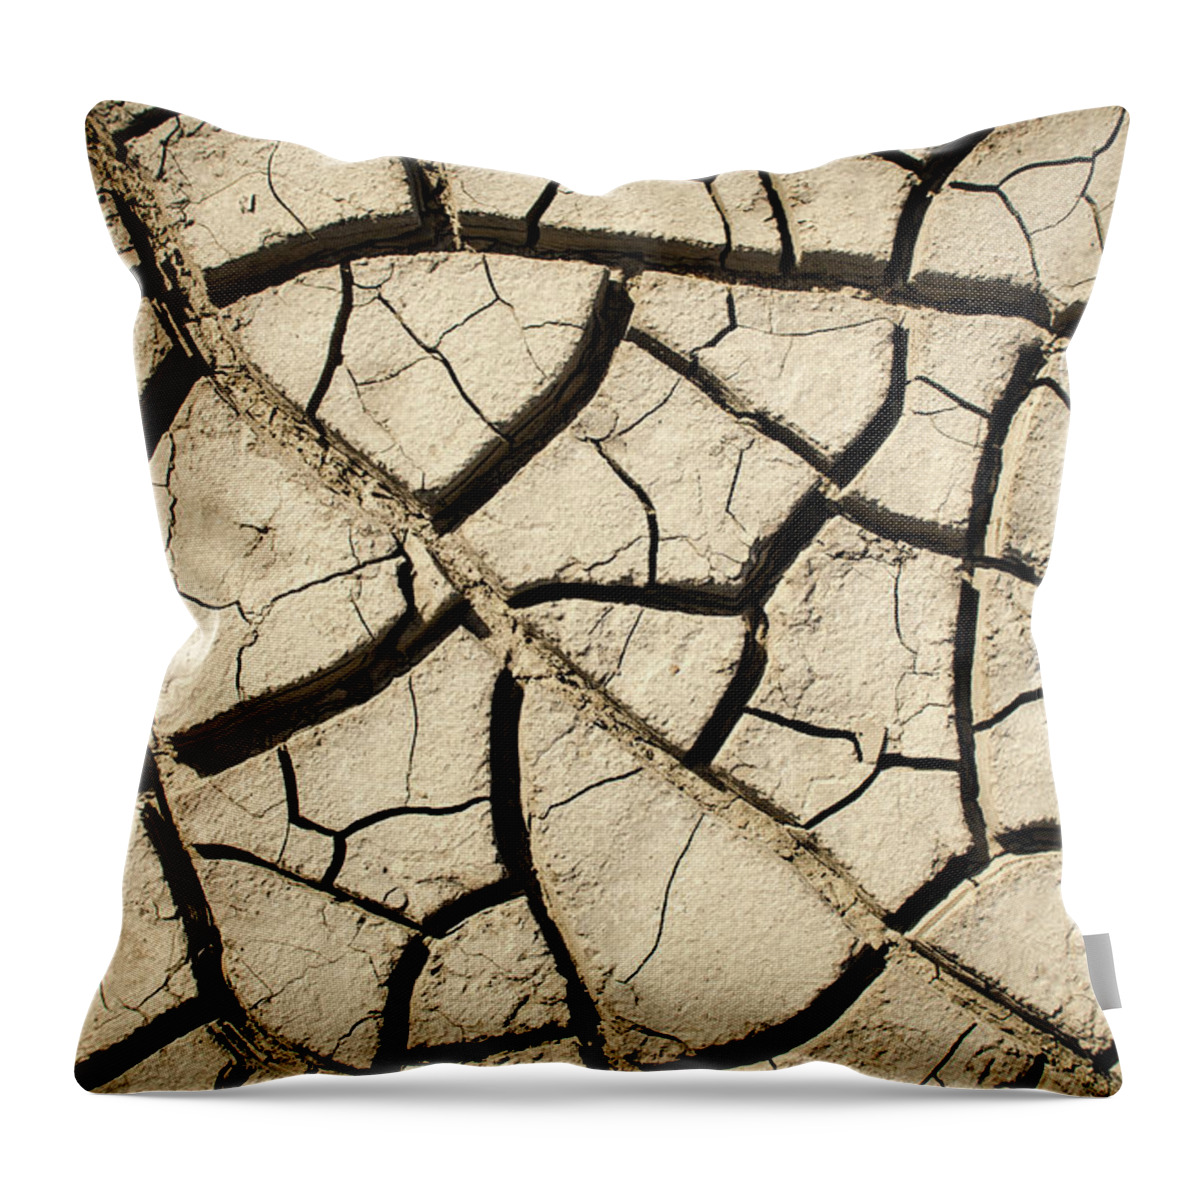 Crack Throw Pillow featuring the photograph River Mud by Jeff Phillippi